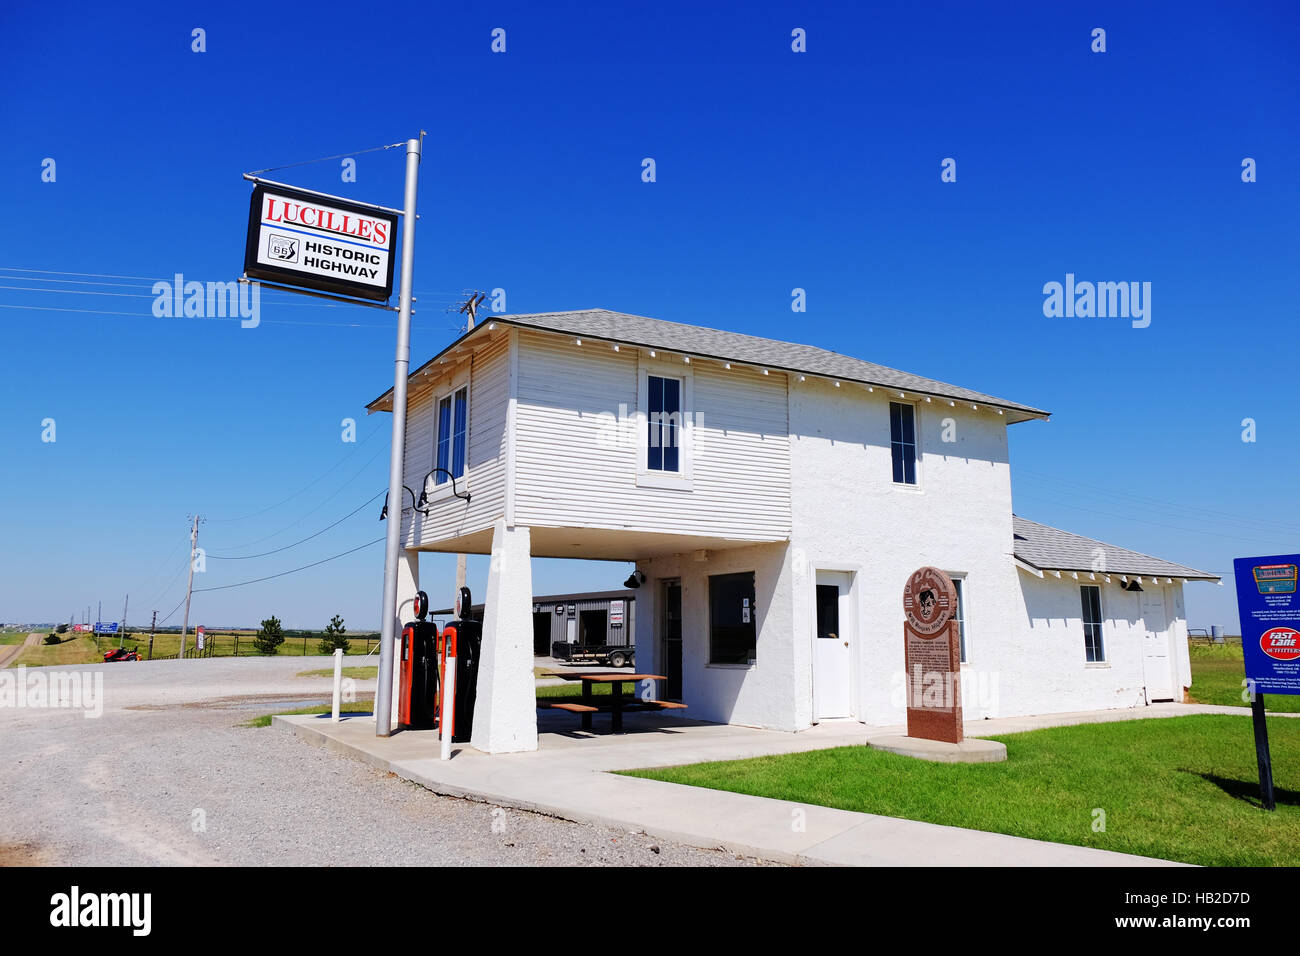 Lucille's is an old historic gas station in Oklahoma on Route 66. Stock Photo